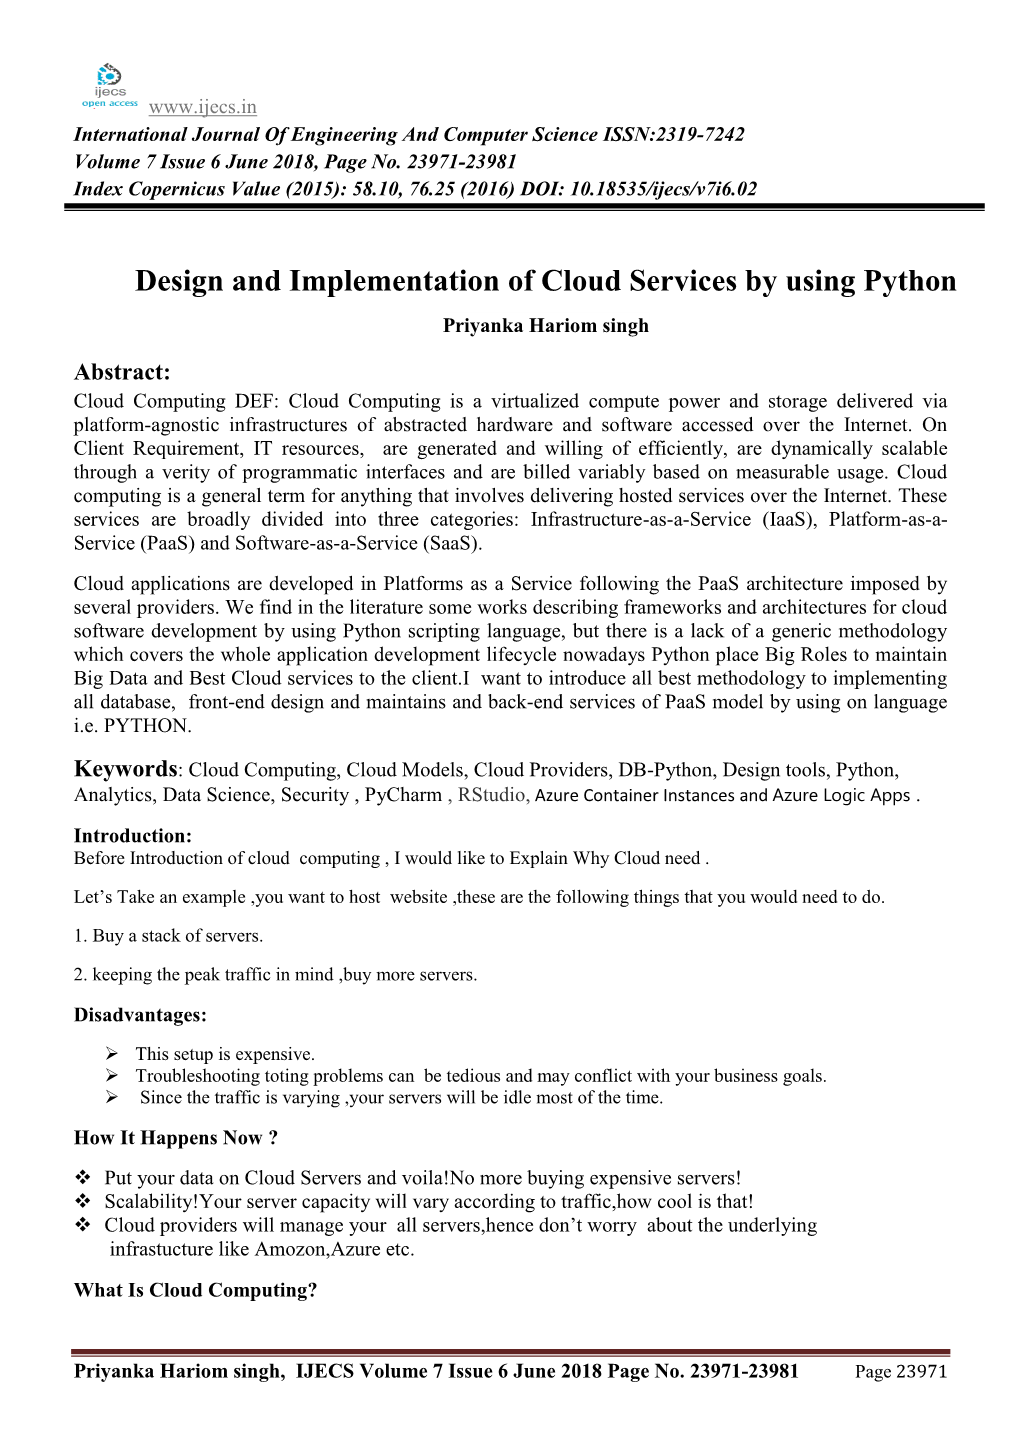 "Design and Implementation of Cloud Services by Using Python "